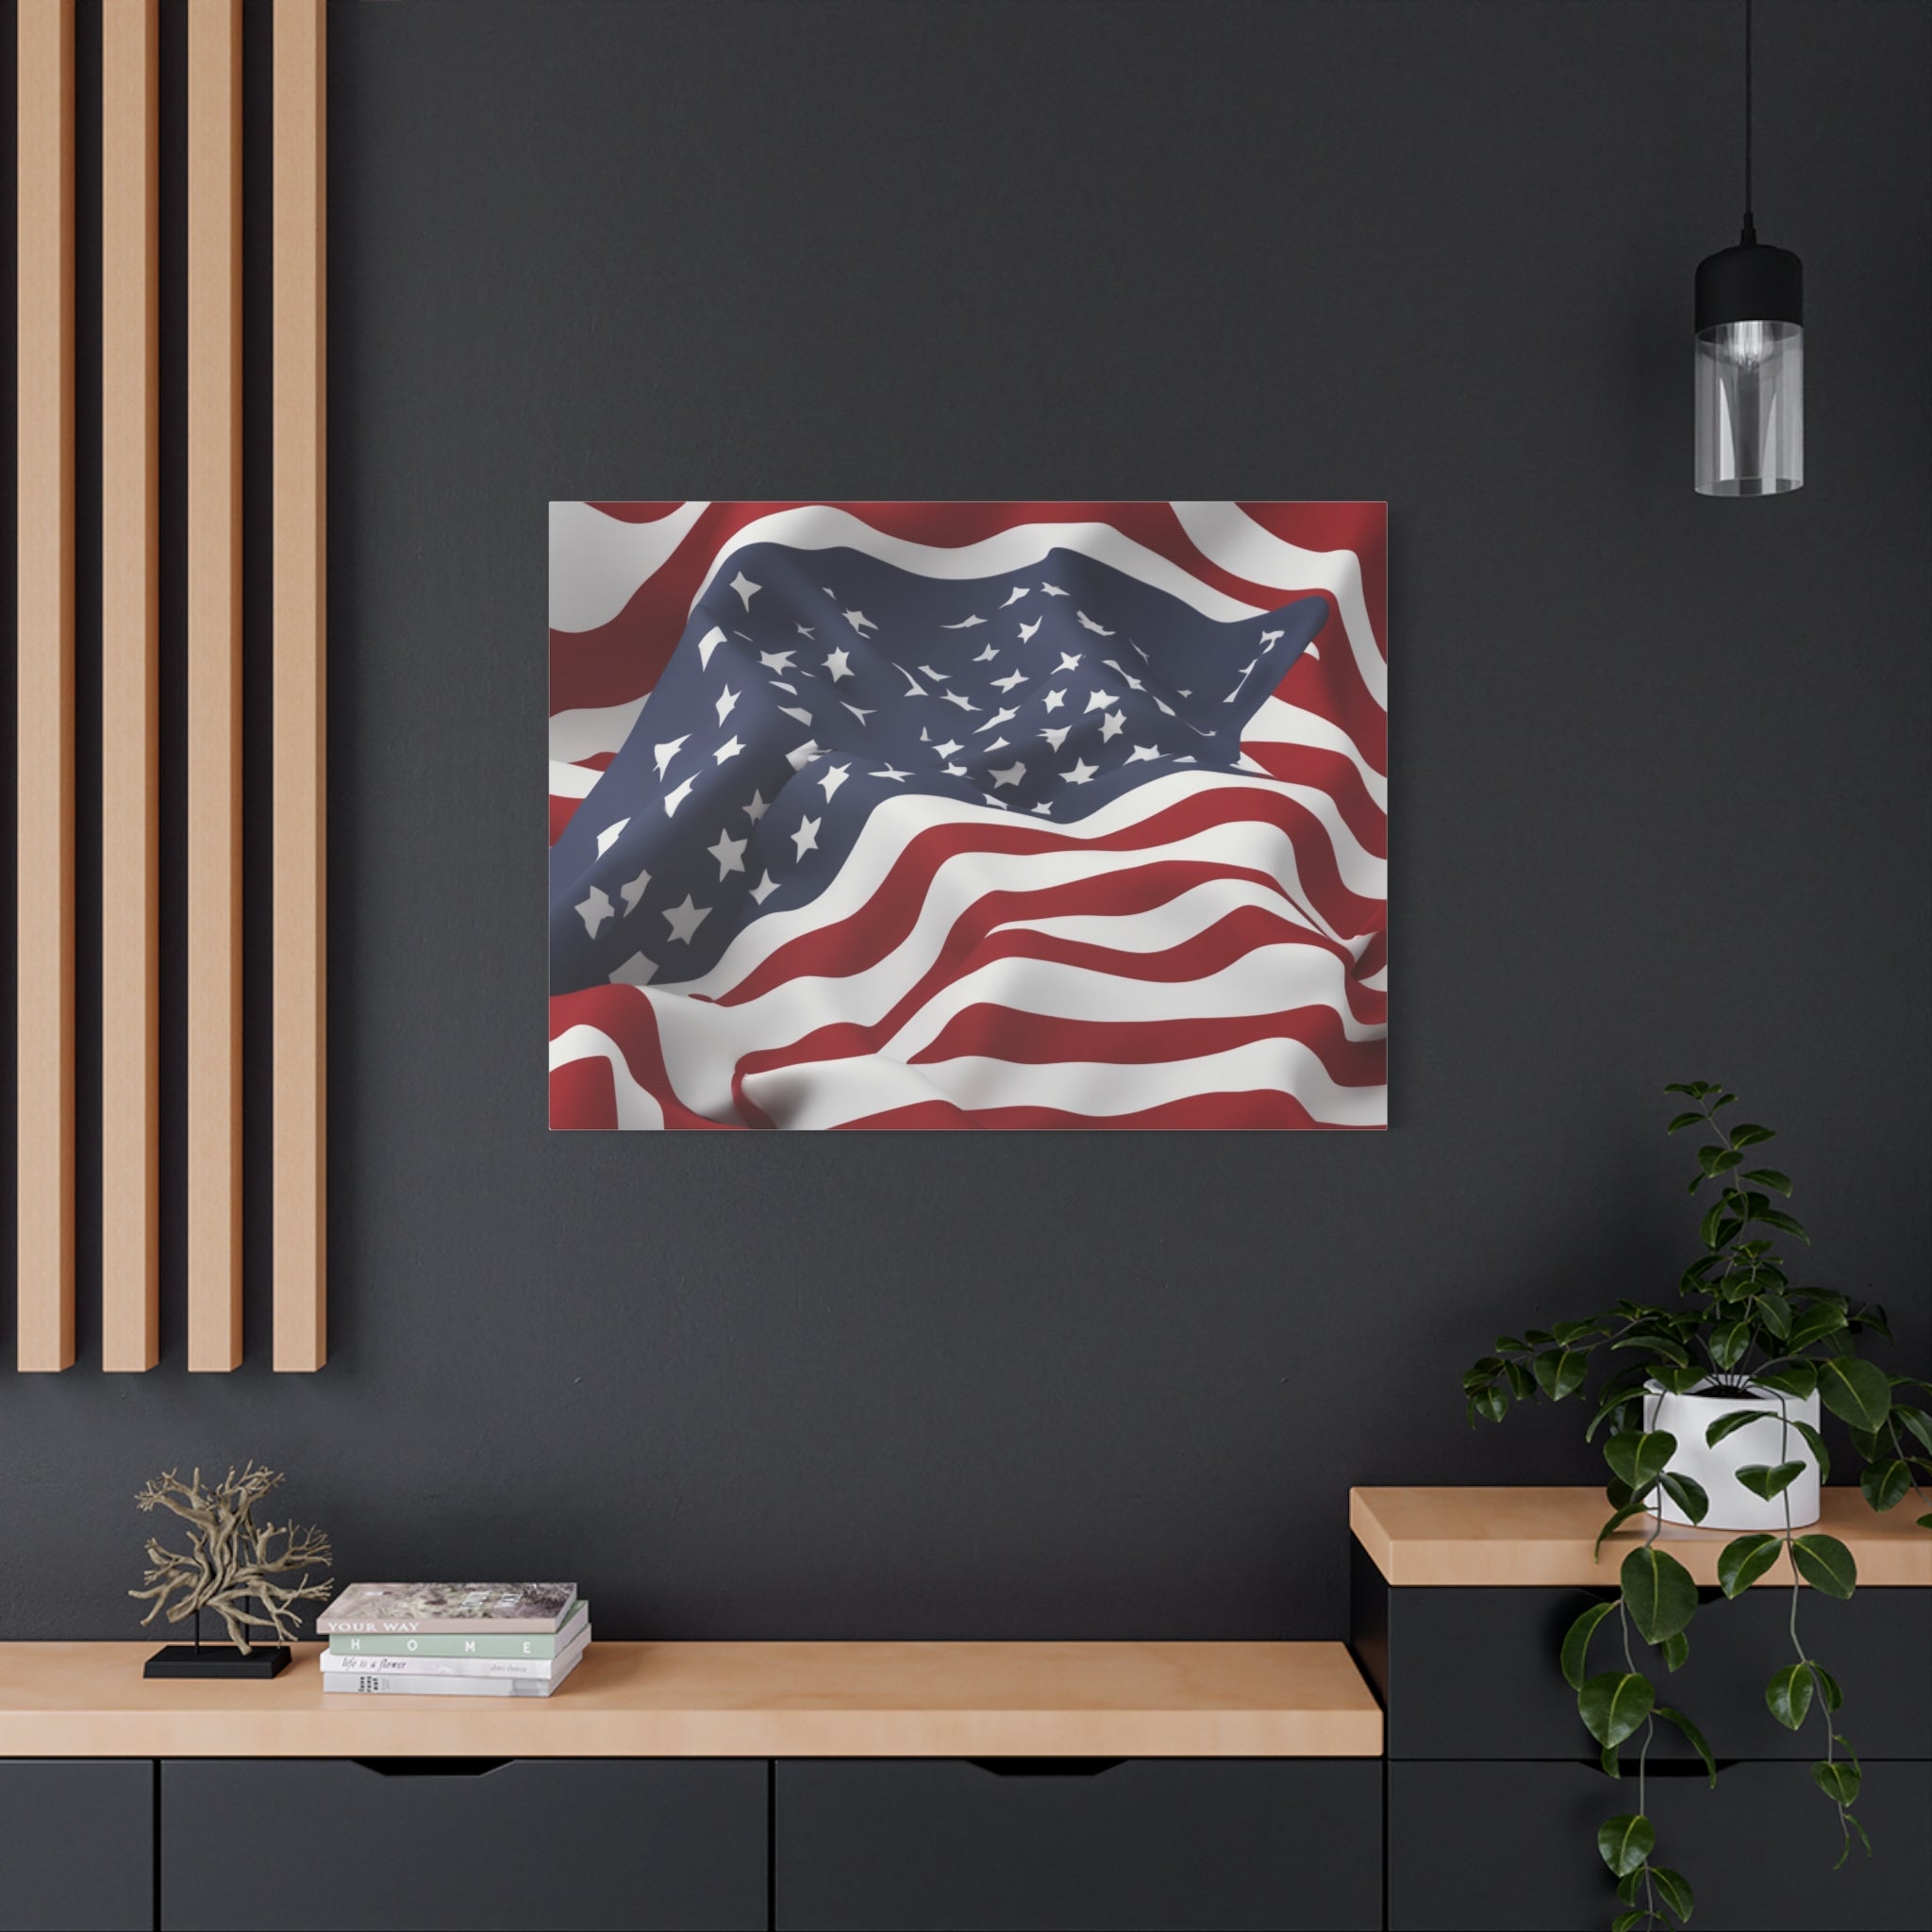 Wall Art AMERICAN FLAG #2 Canvas Print Painting Giclee GW Love Patriot Beauty Design House Home Office Decor Gift Ready to Hang